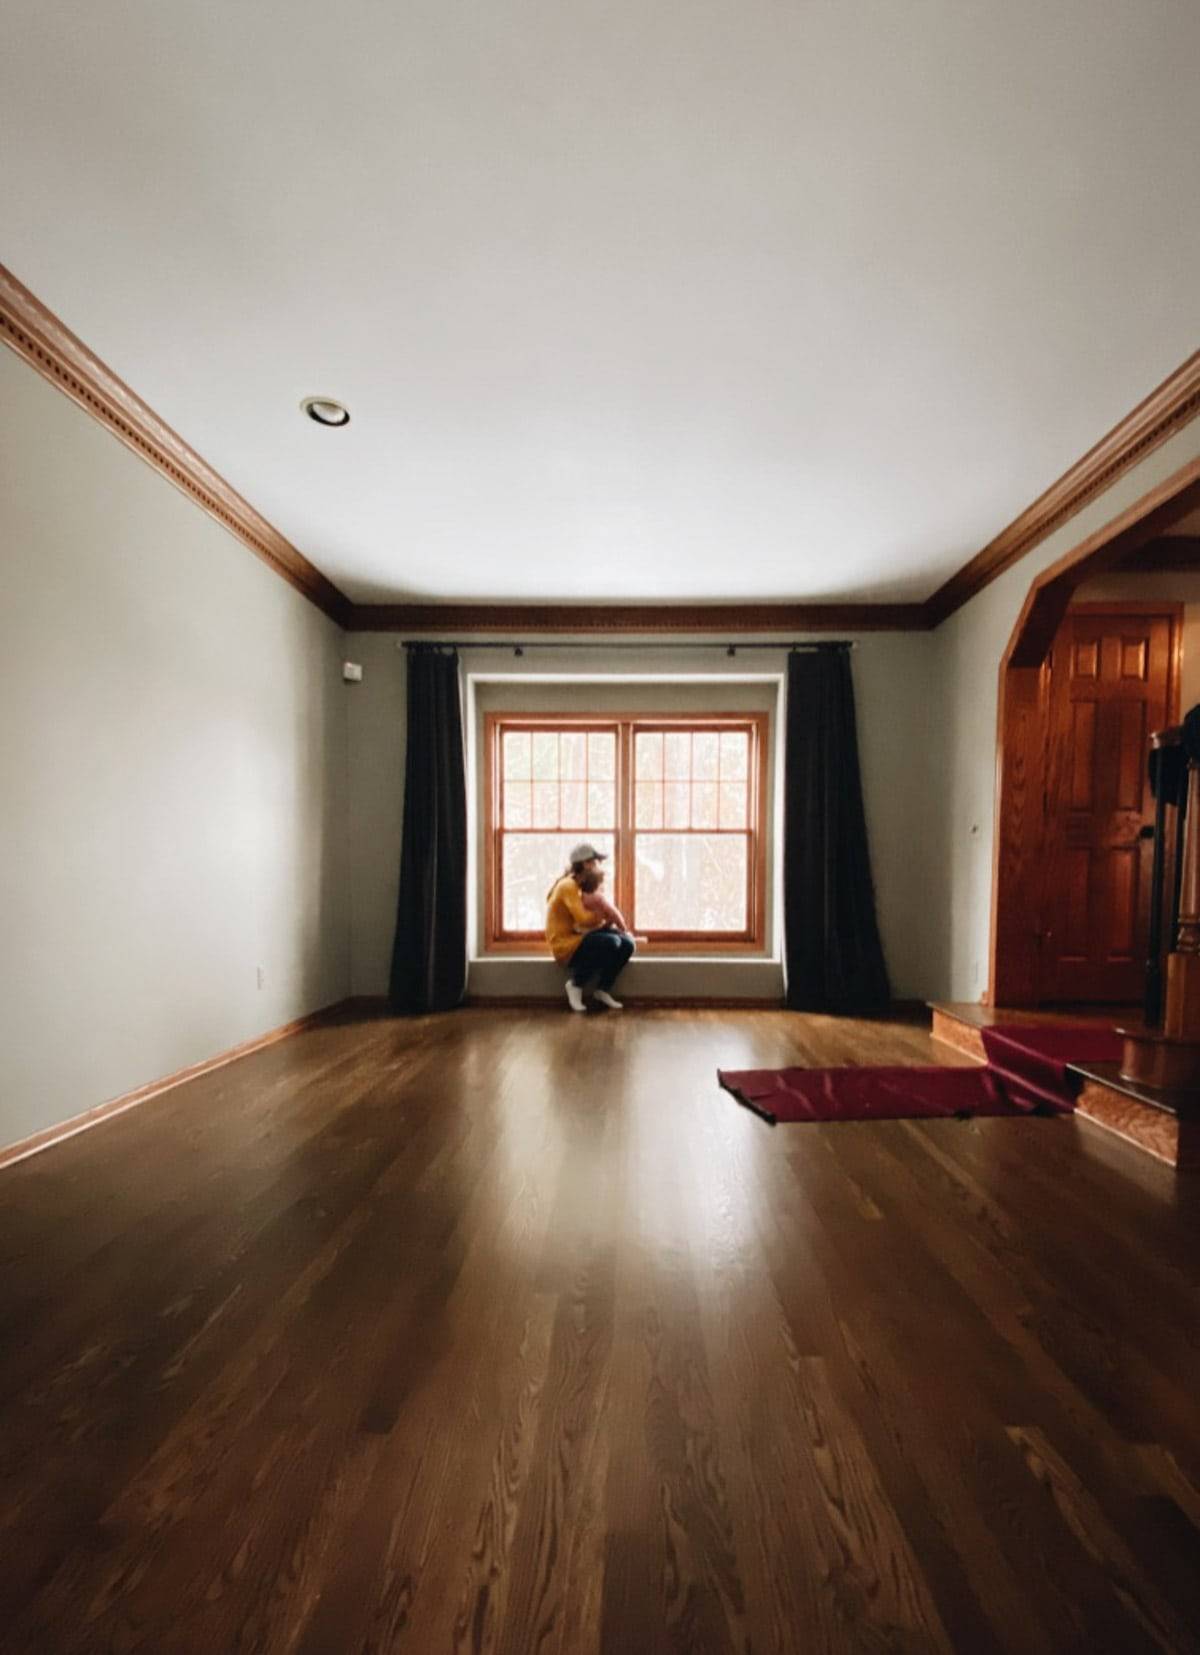 A person sitting on the far end of an empty room.